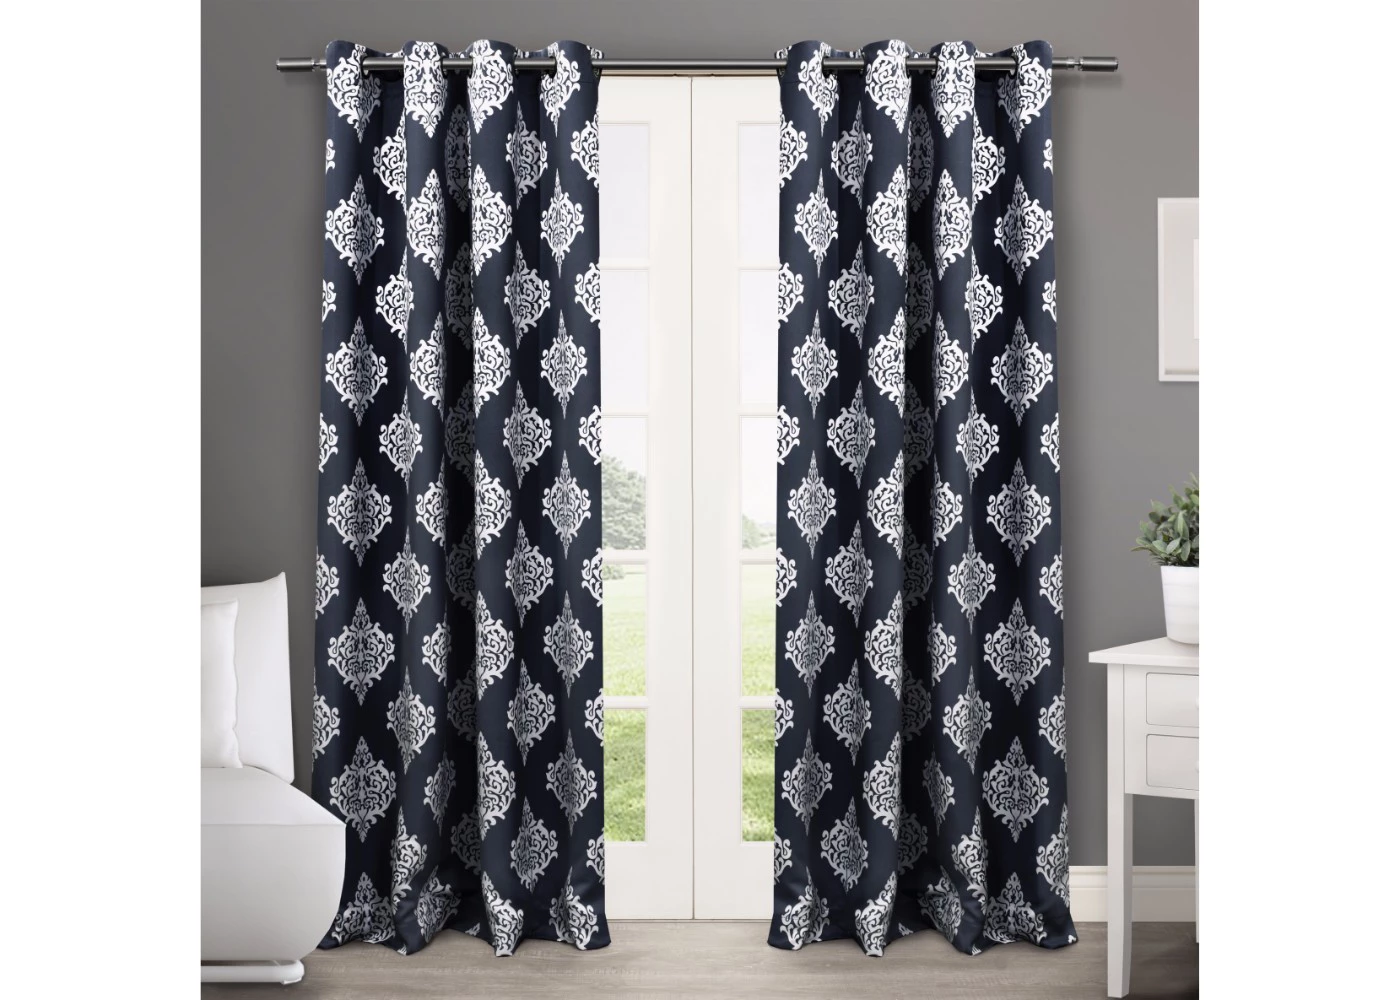 Set of 2 / Pair Medallion Blackout Thermal Grommet Top Window Curtain Panels Exclusive Home - image 1 of 5